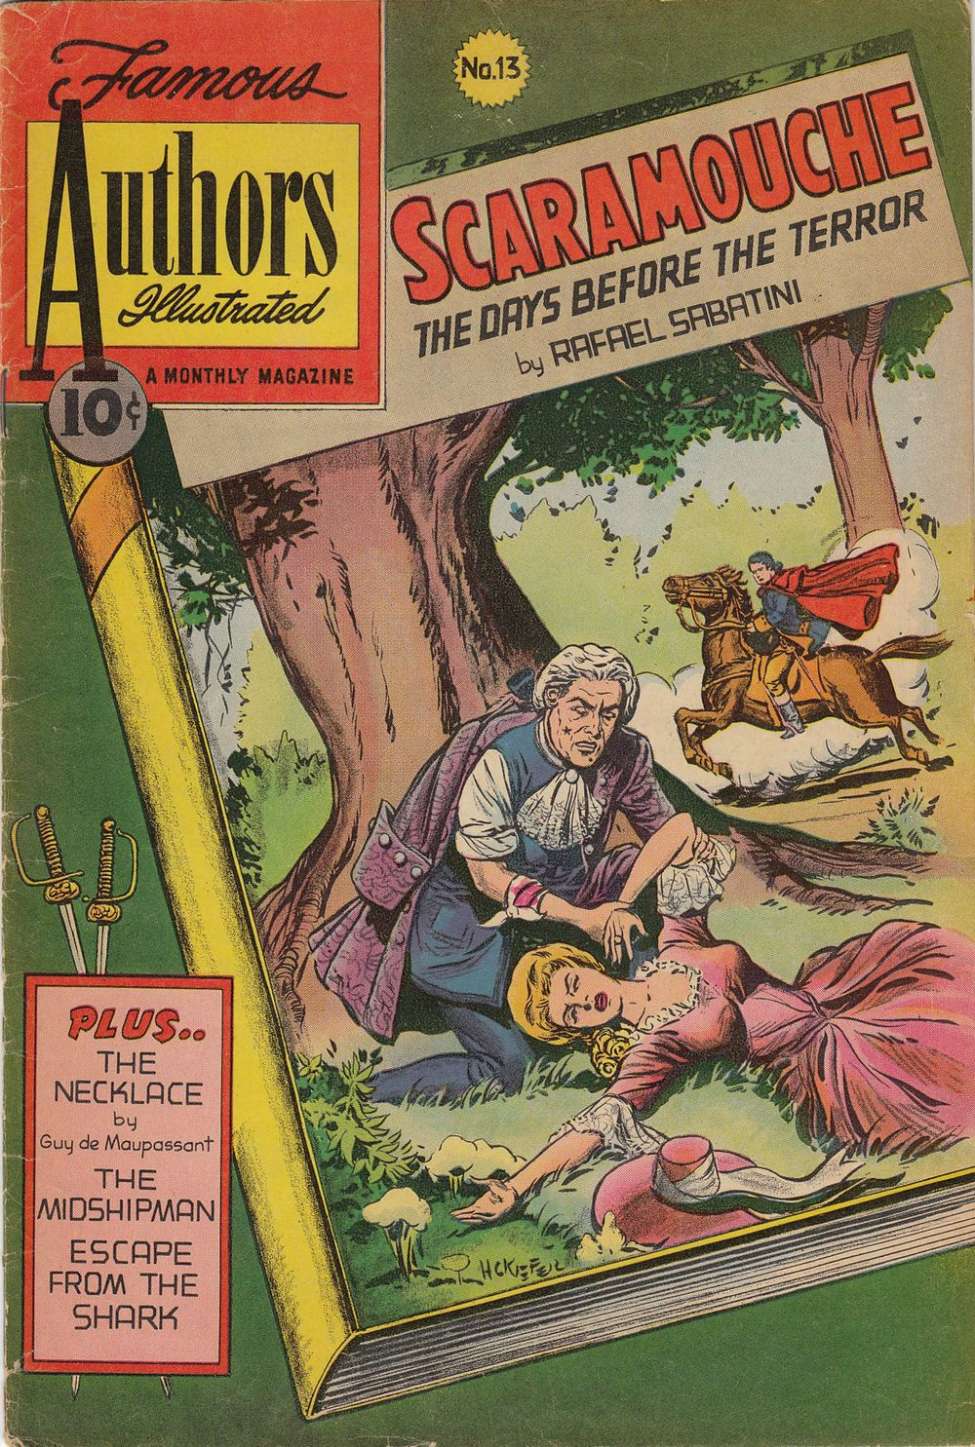 Comic Book Cover For Stories By Famous Authors Illustrated 13 - Scaramouche - Version 2